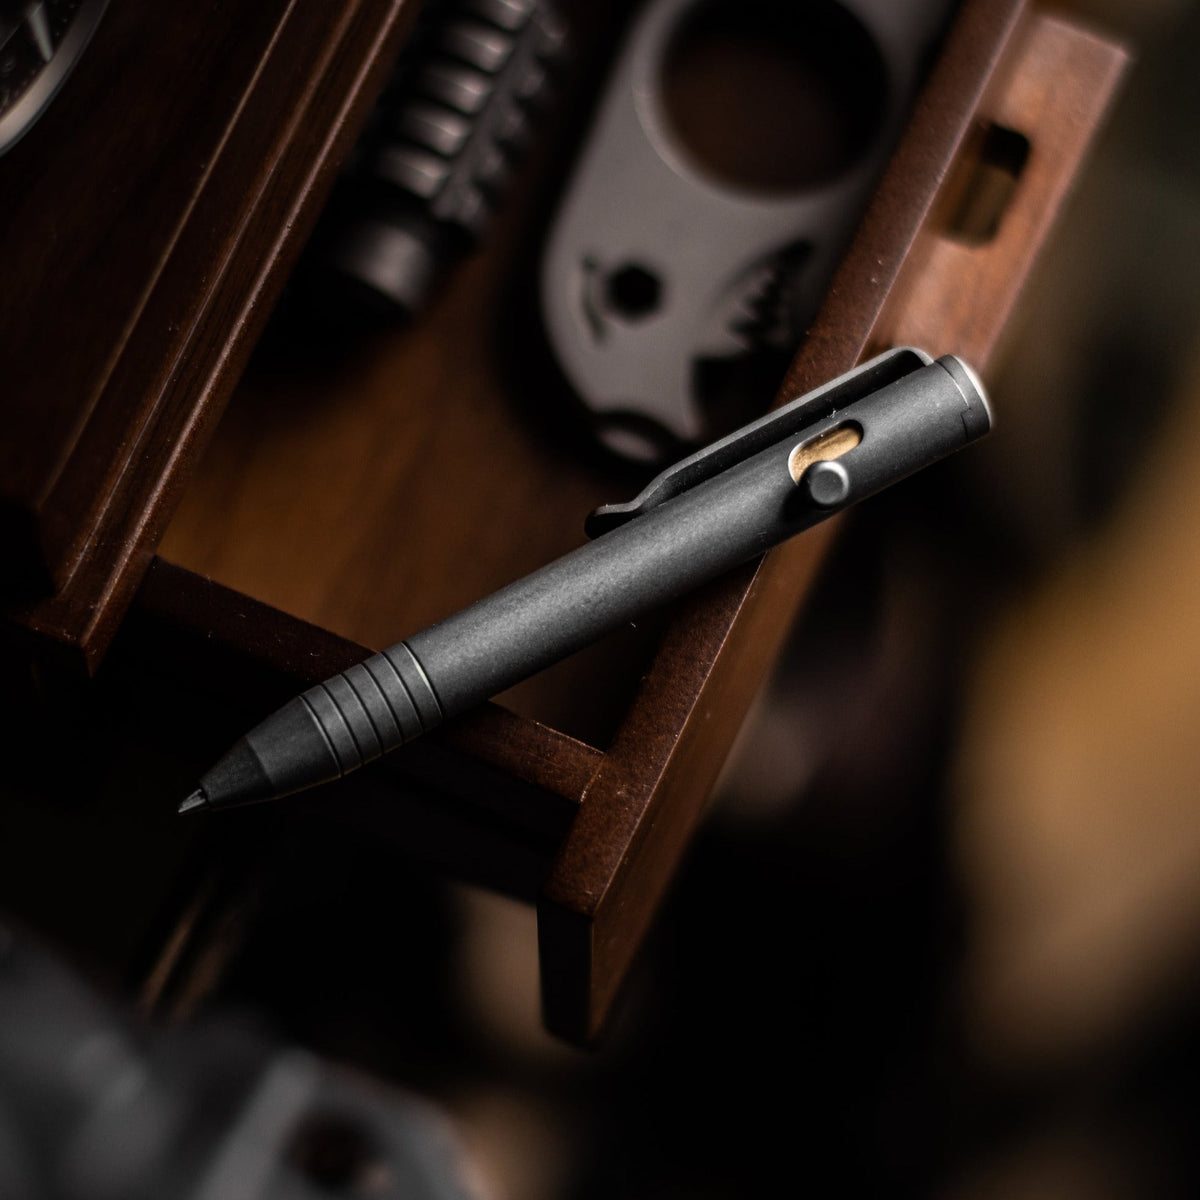 Limited Urban Survival Bolt Action Pens – Craft and Lore